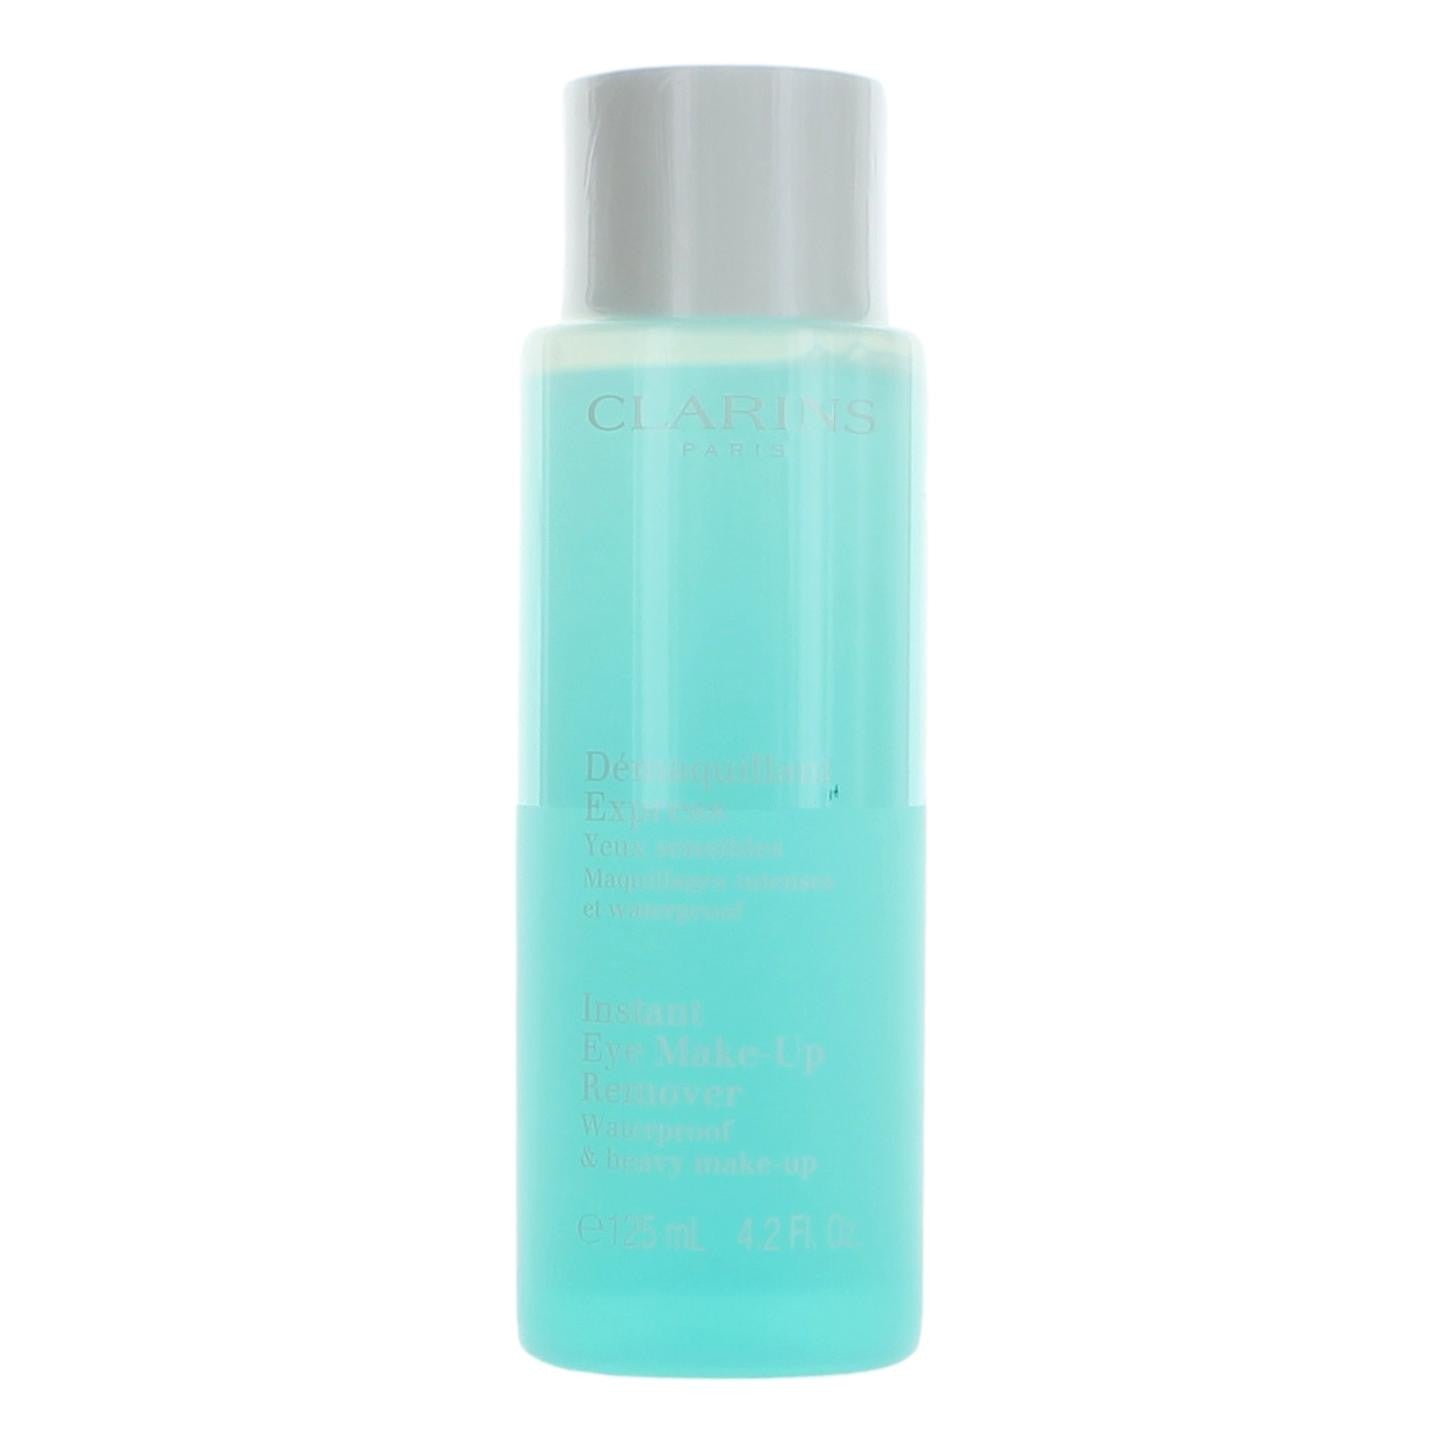 Clarins by Clarins, 4.2oz Demaquillant Express Instant Eye Makeup Remover